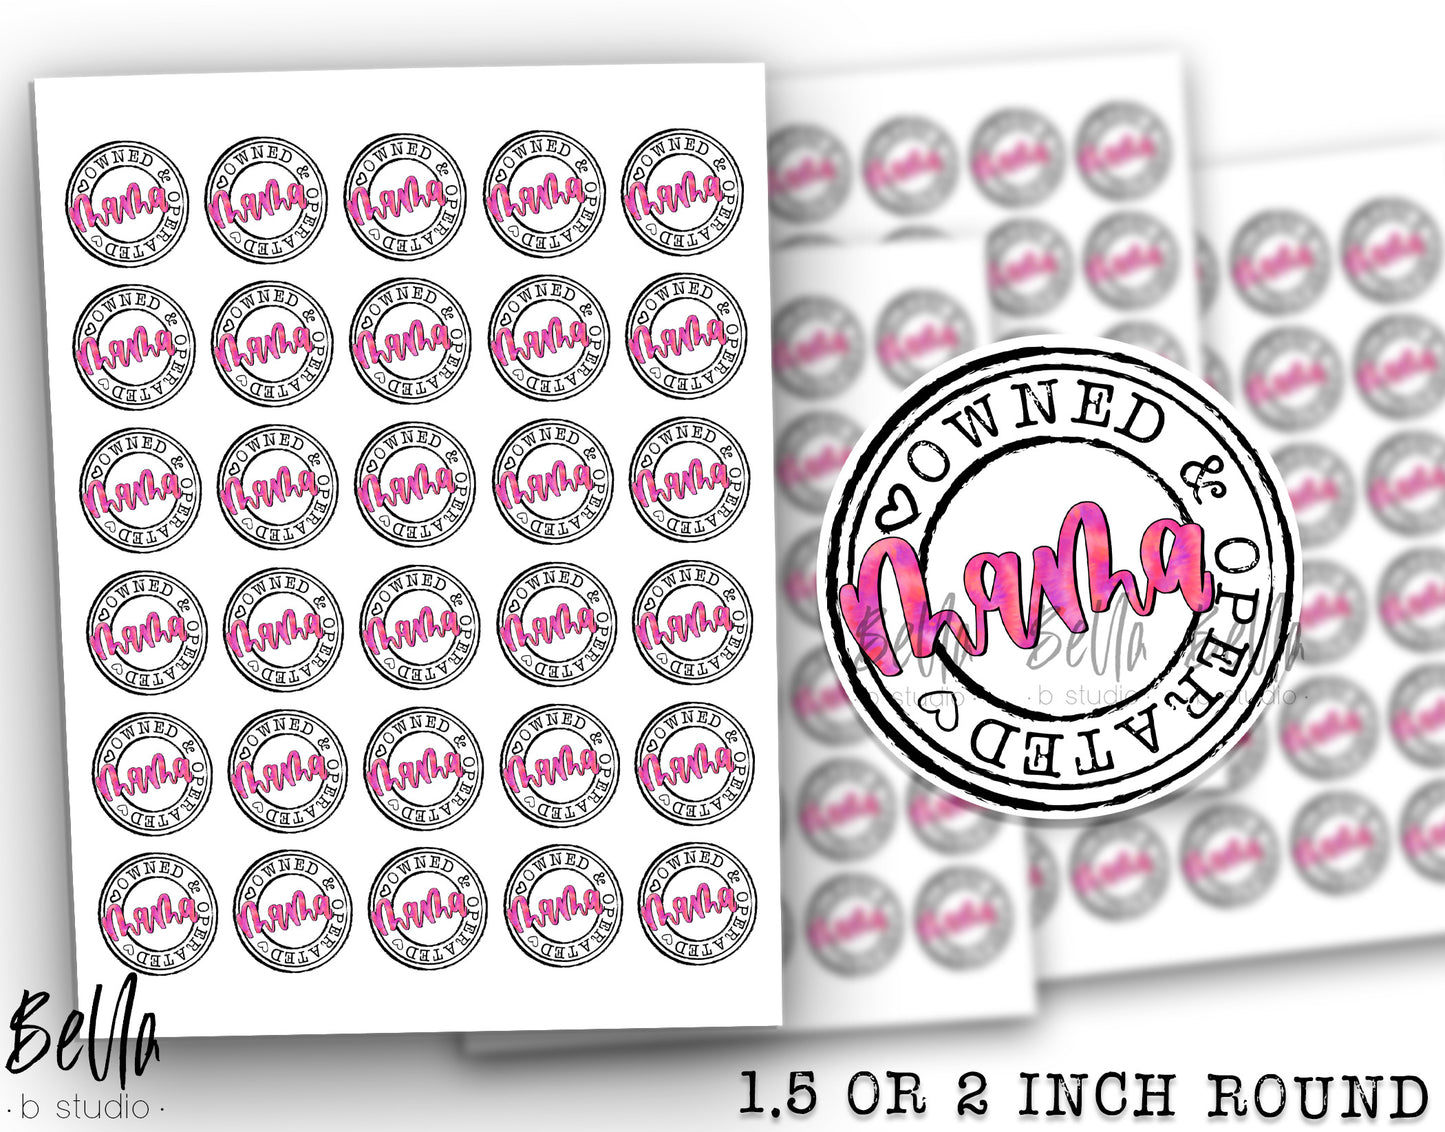 "Mama Owned And Operated" Sticker Sheet - Small Business Packaging Stickers